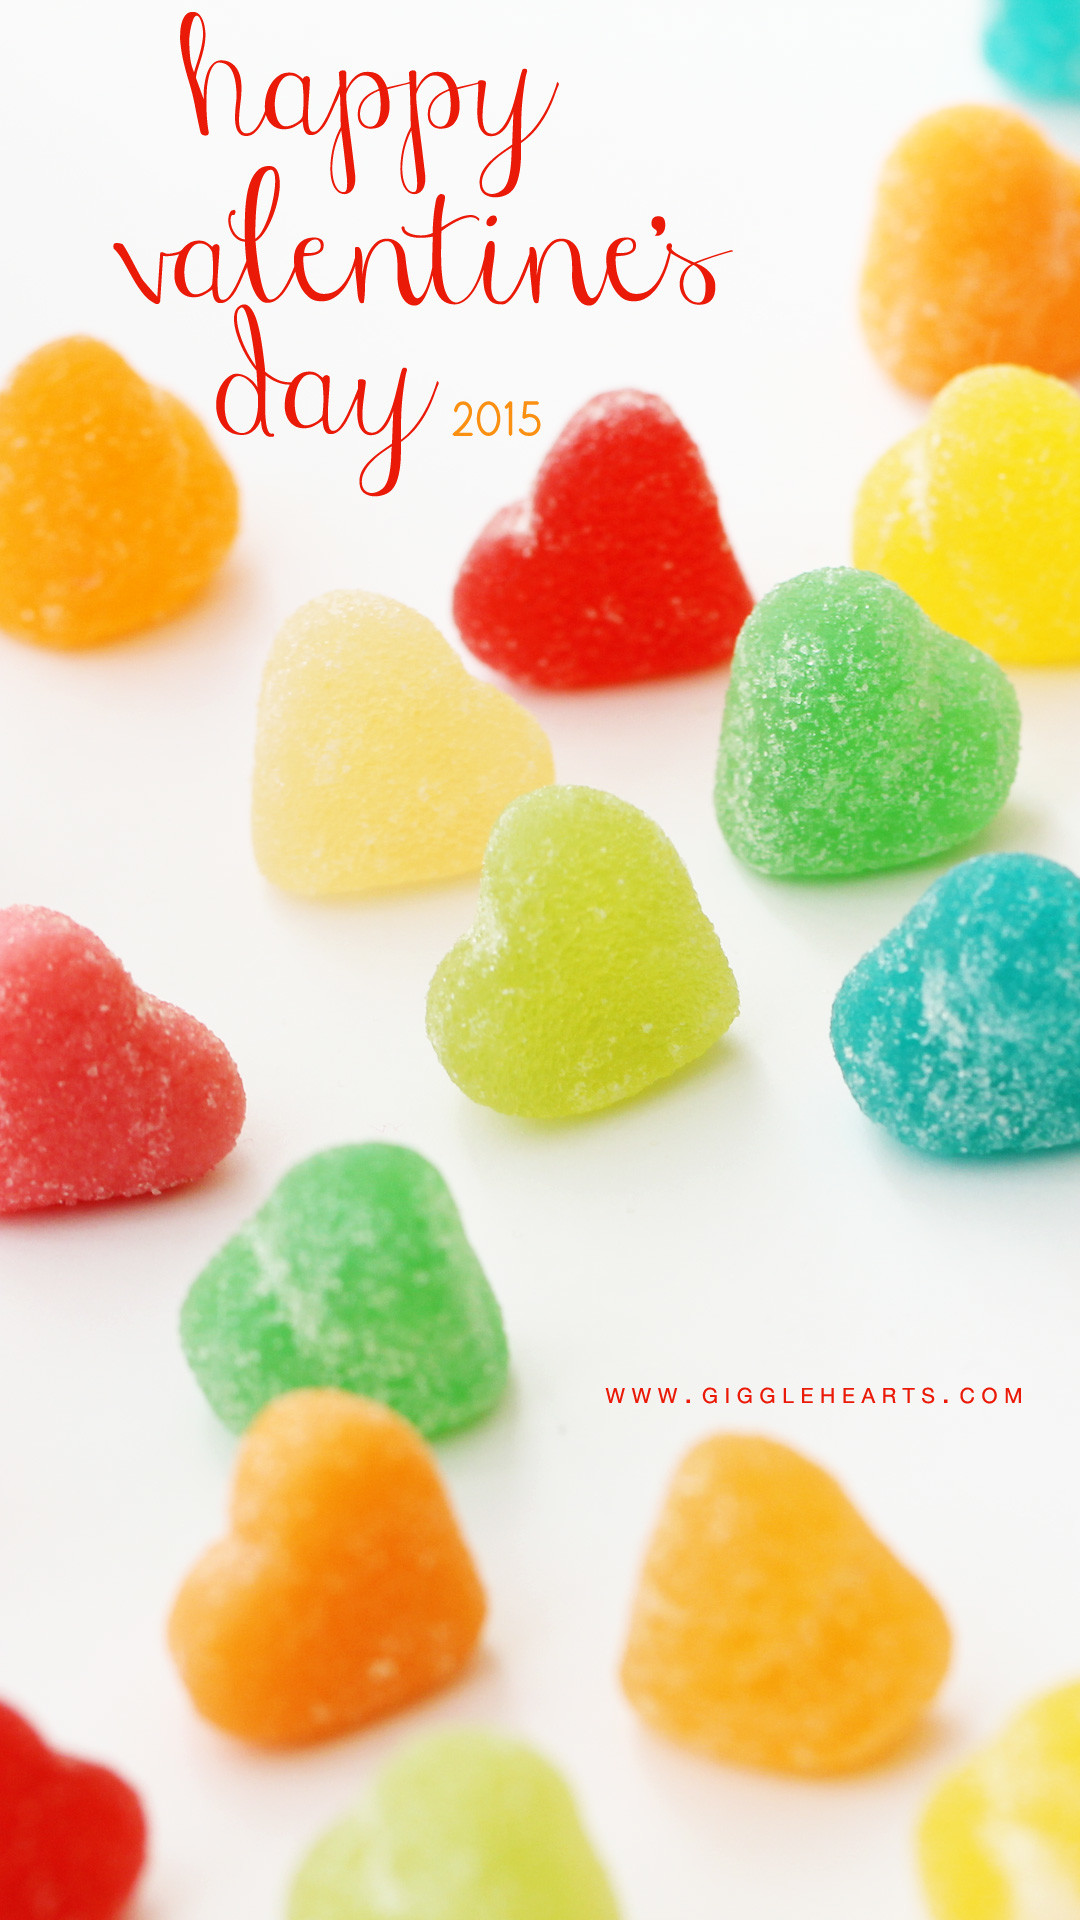 … free iphone wallpaper to download for valentine s day …